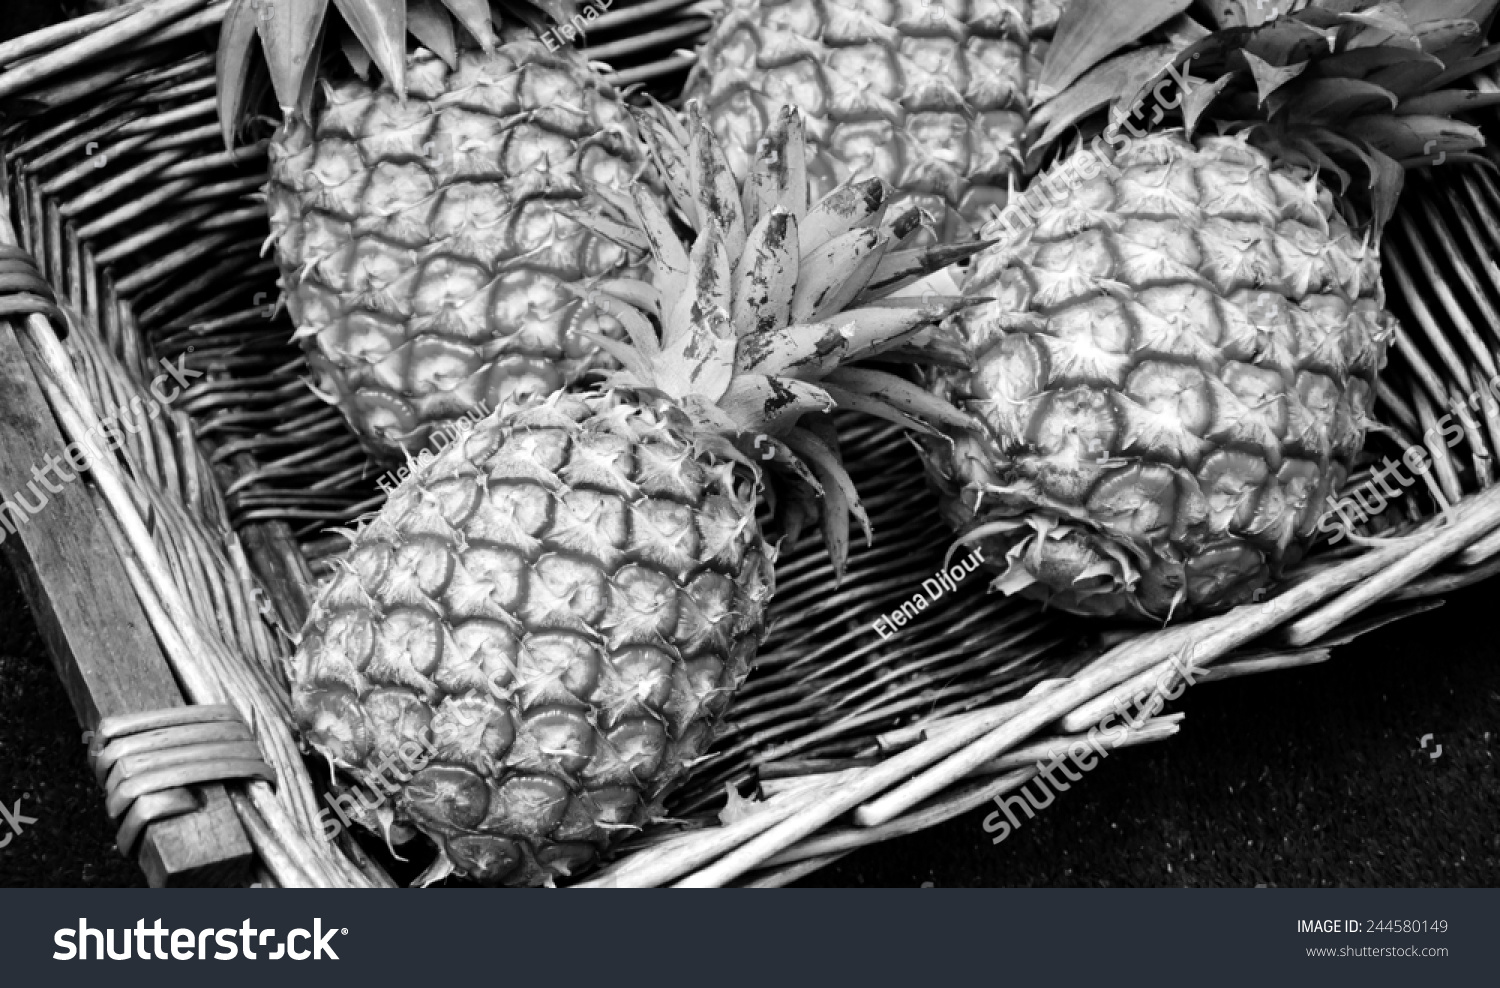 Pineapples in wicker basket at organic farmers market in Paris (France). Aged photo. Black and white. #244580149